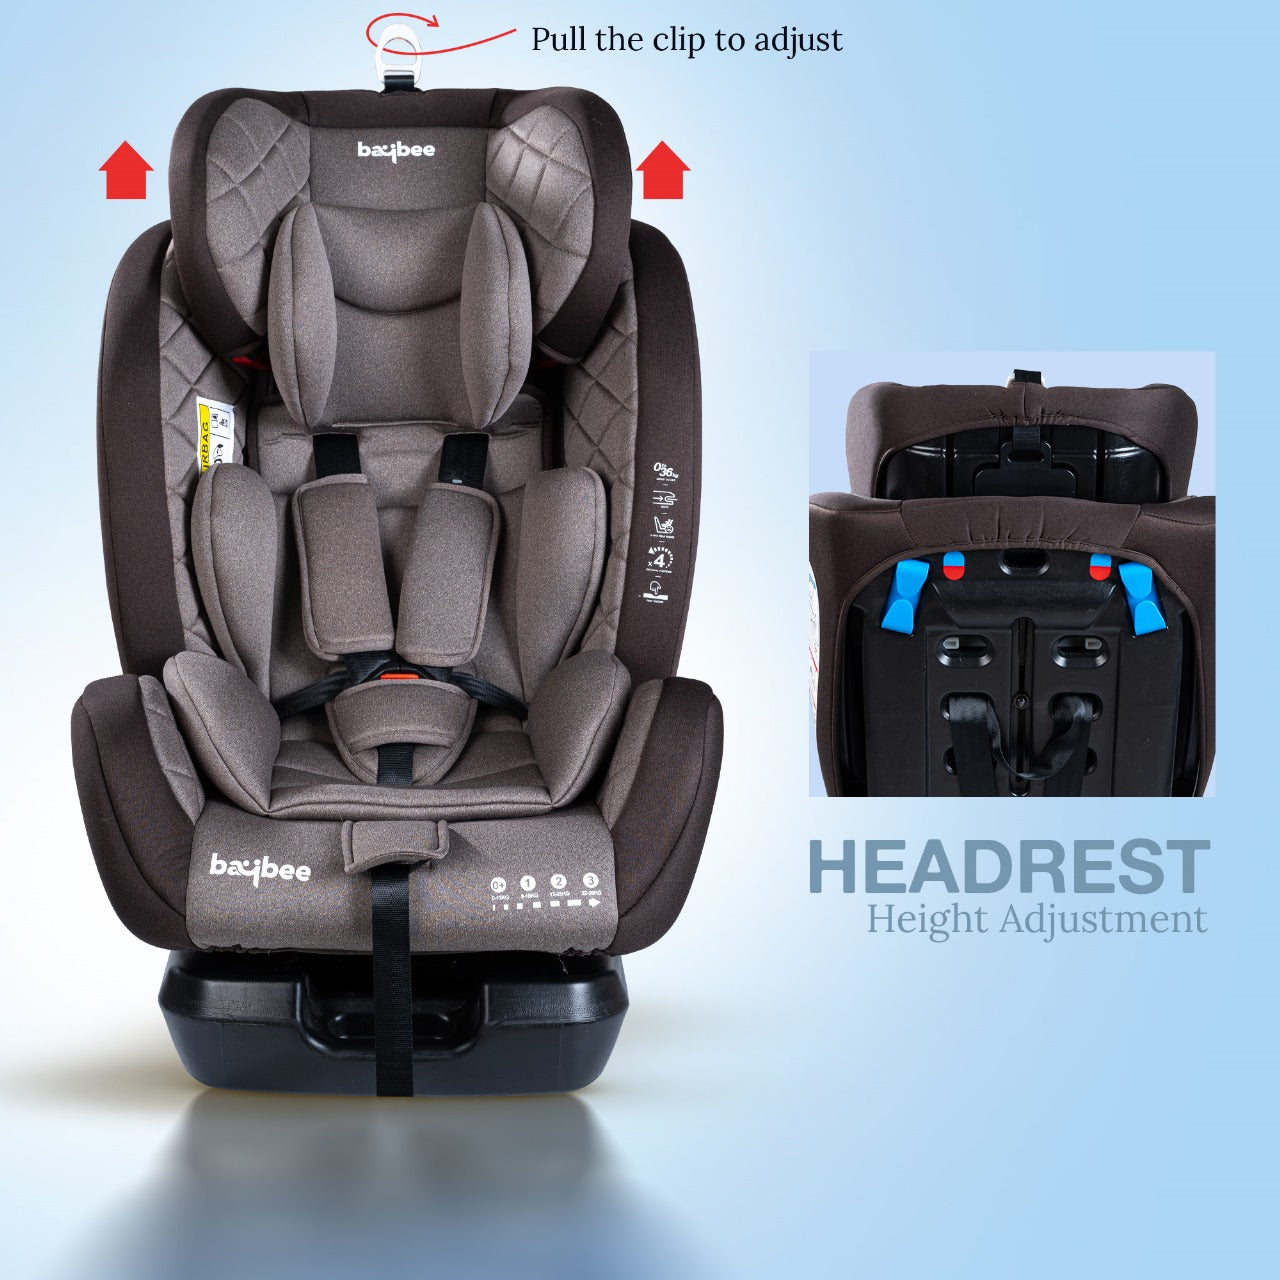 Minikin Defender Isofix Car Seat I 5 Point Safety Harness I NB - 12 Years I Brown